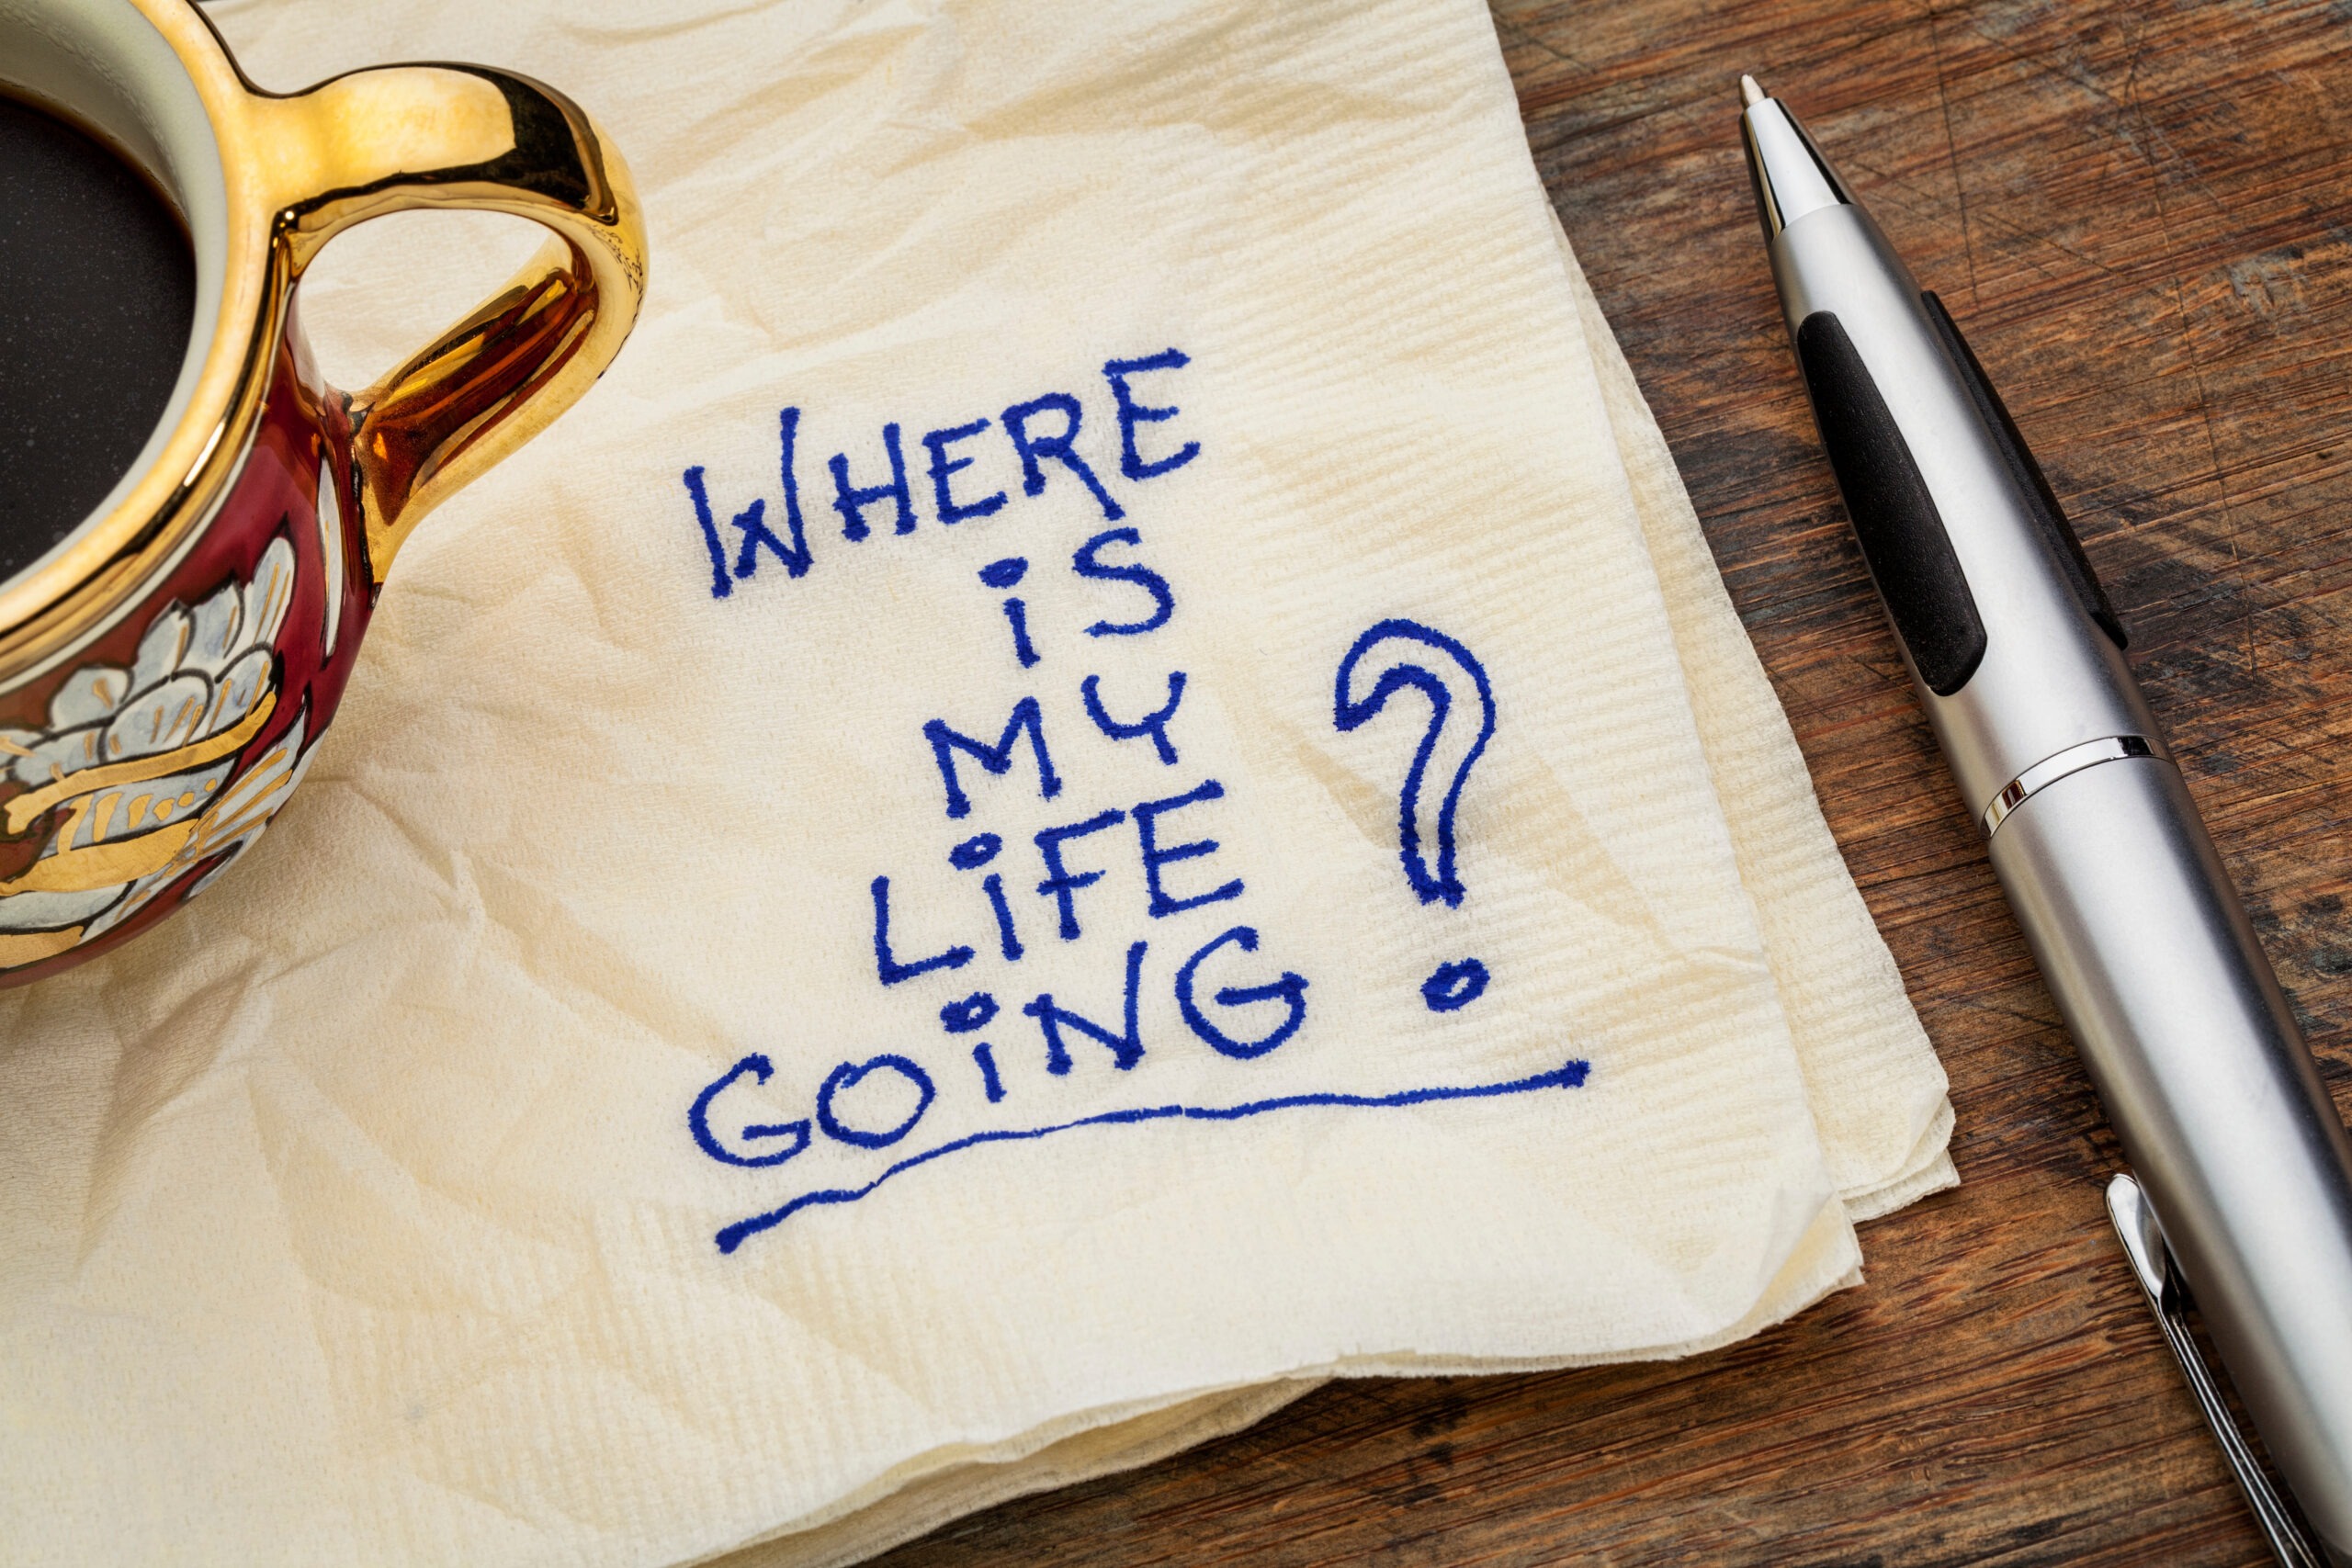 The words "where is my life going?" are written on a white napkin, next to a pen and gold mug. Your life purpose can change your life, but you have to figure it out first.